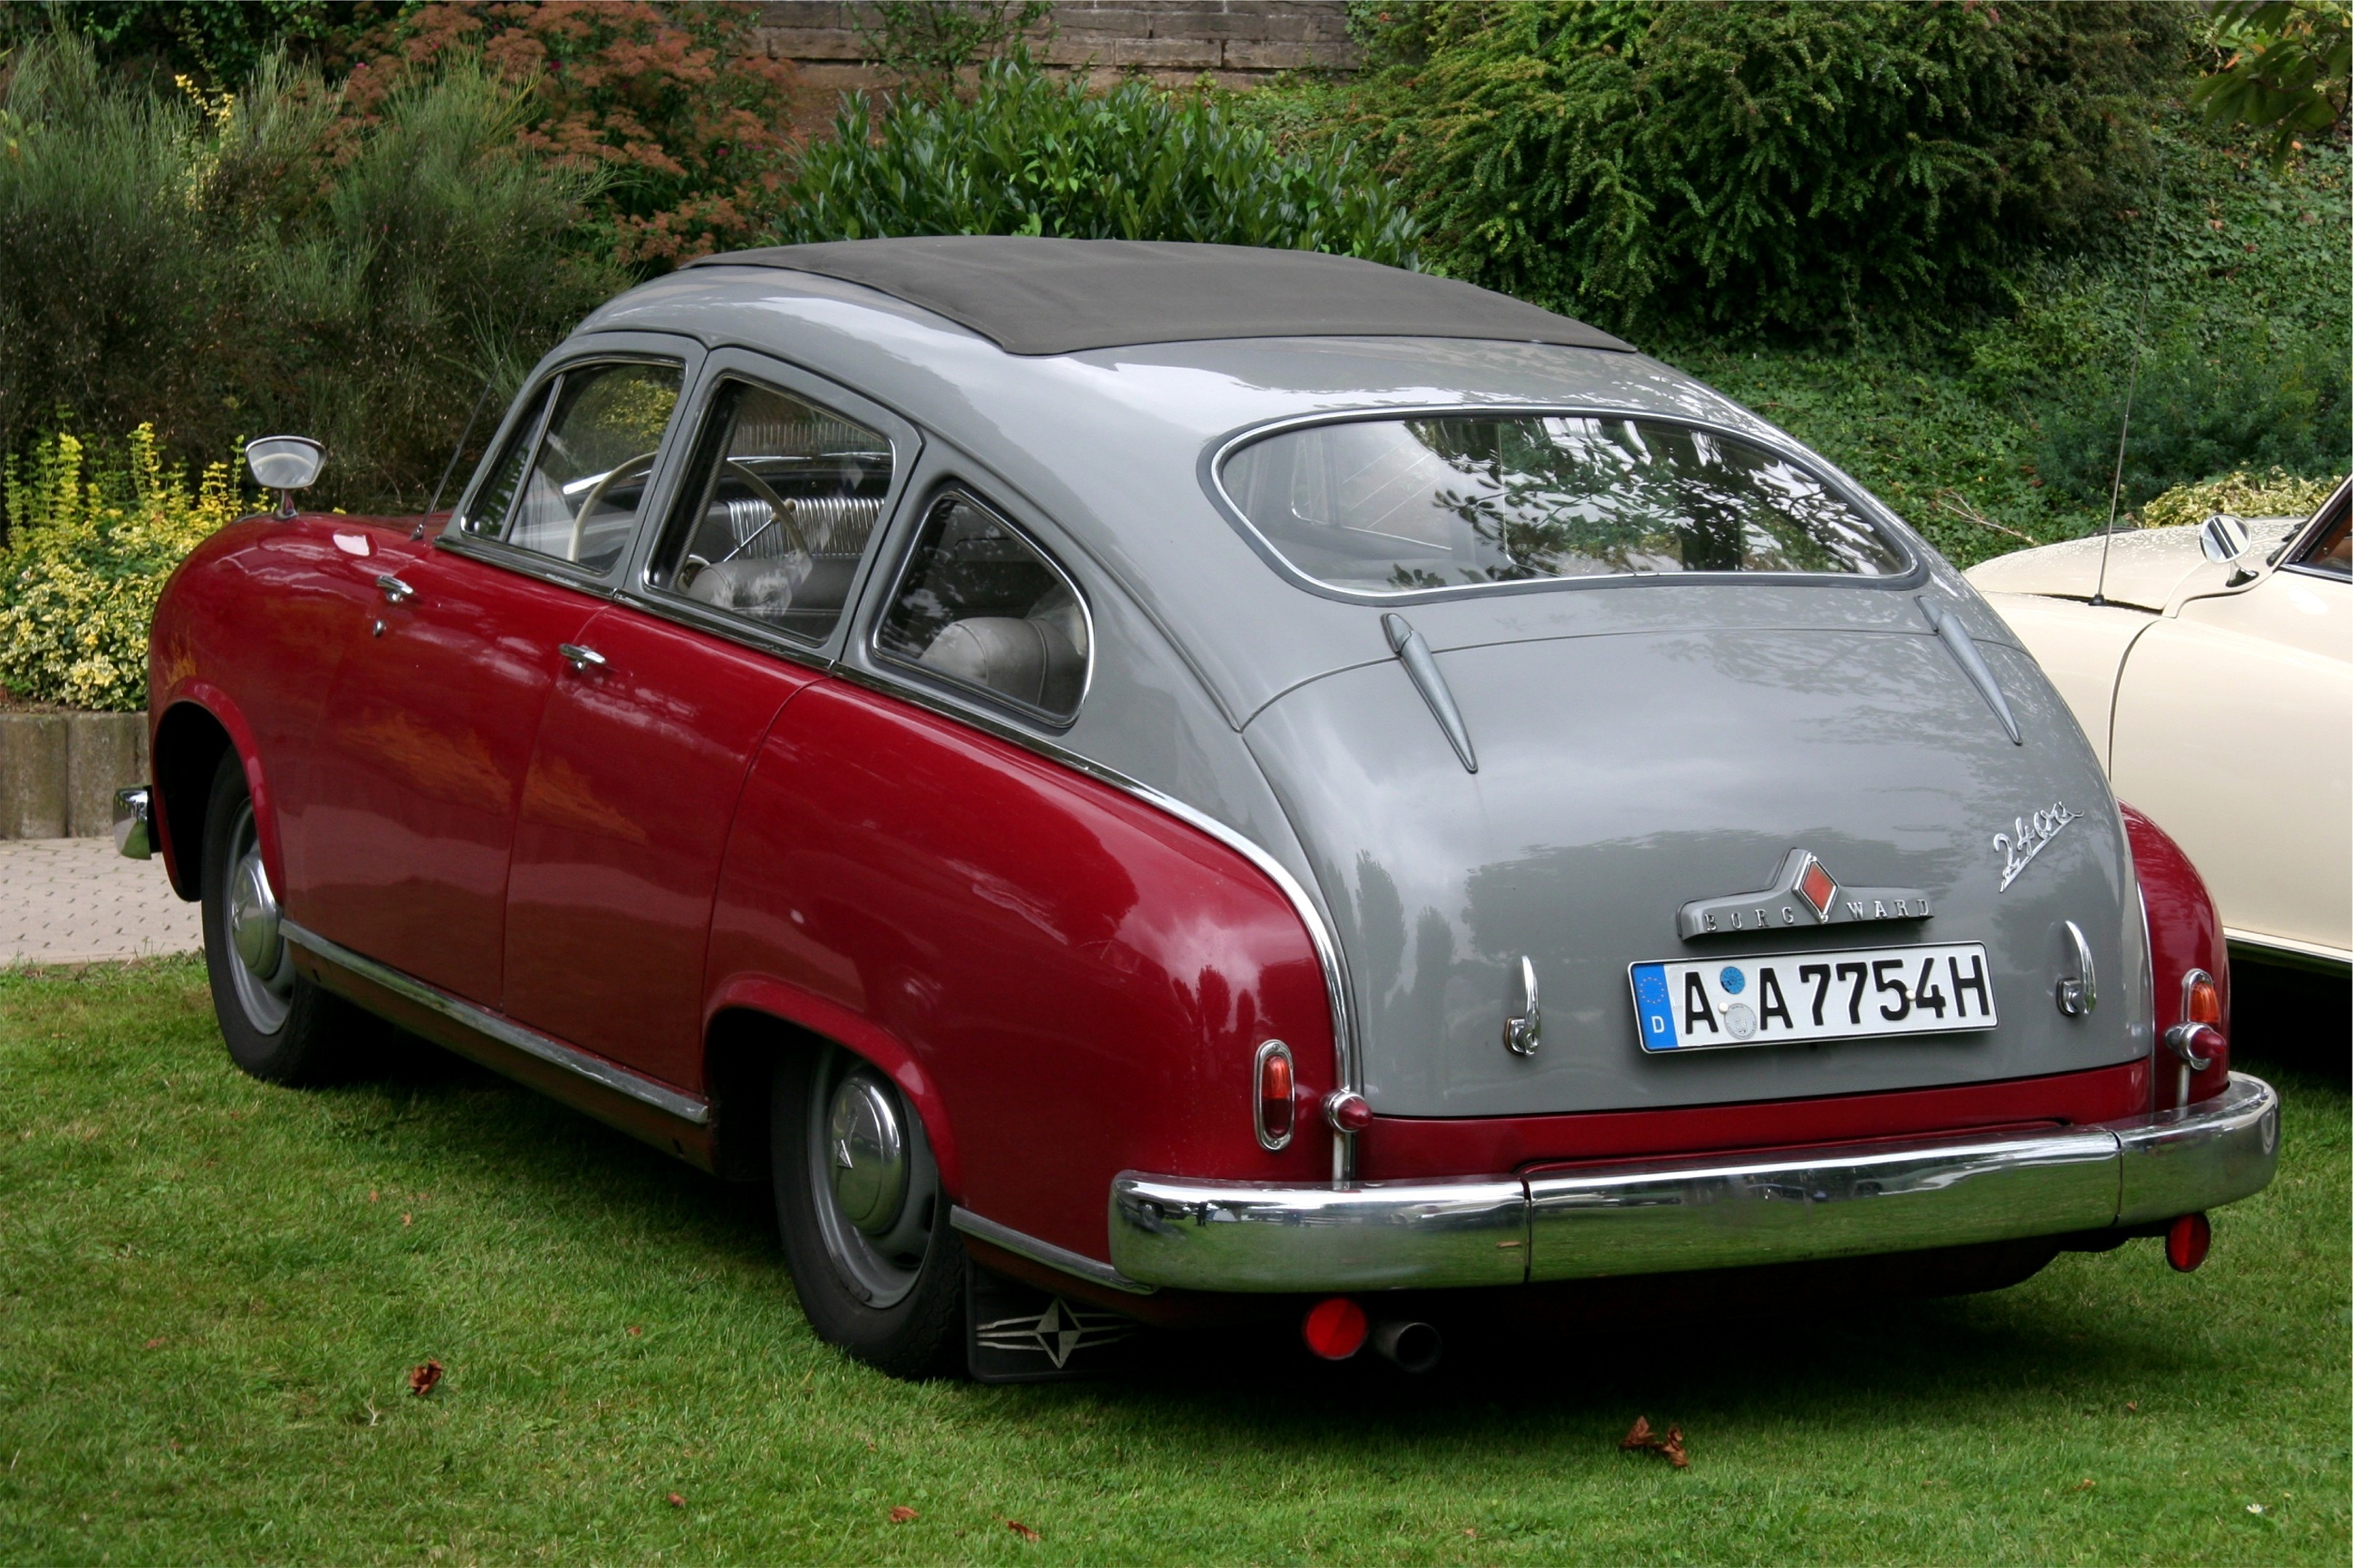 Borgward 230L Photo Gallery: Photo #07 out of 10, Image Size - 740 ...